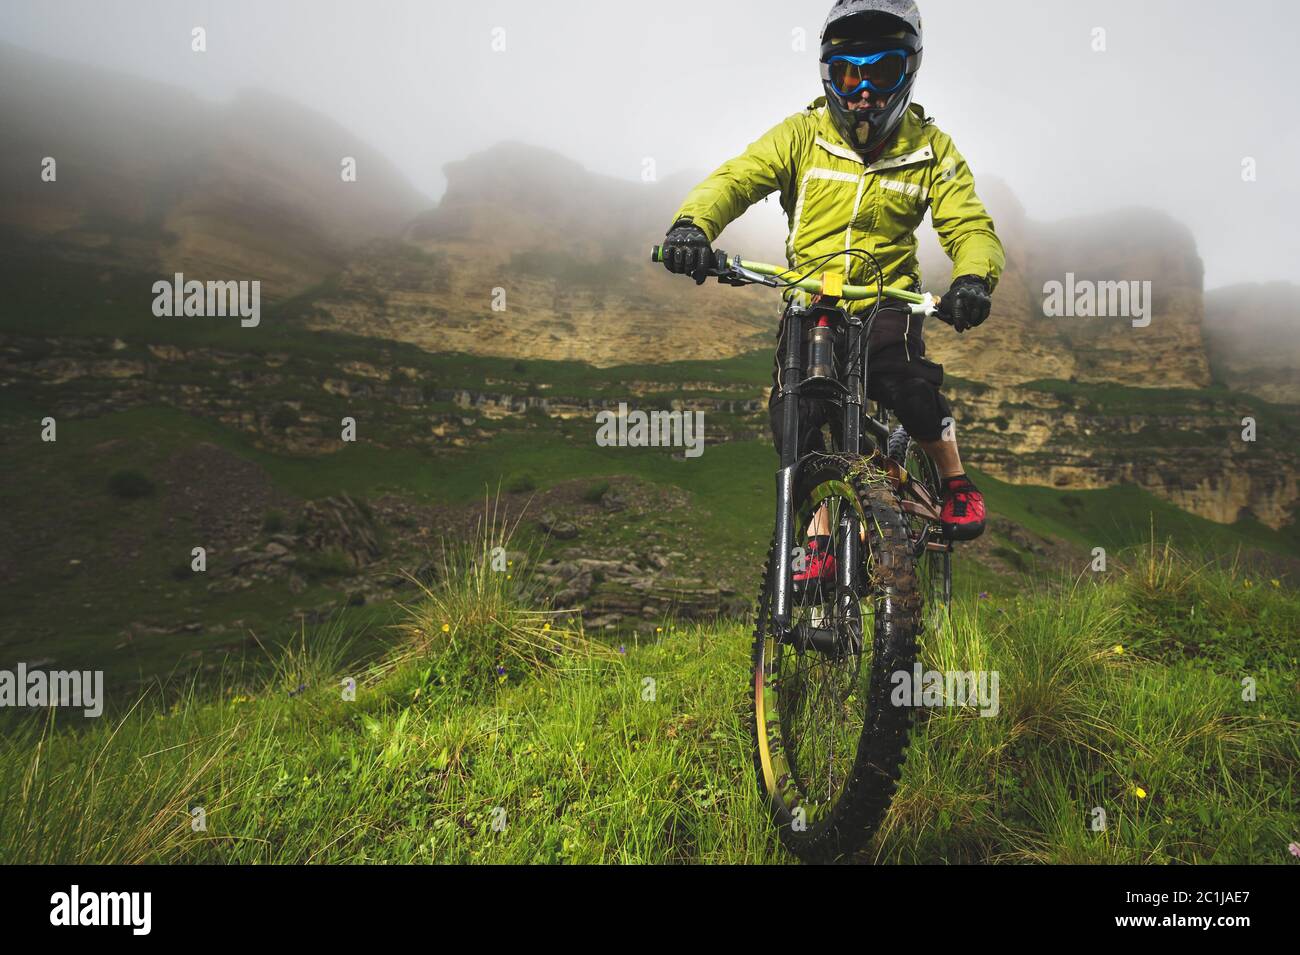 A man in a mountain helmet riding a mountain bike rides around the beautiful nature in cloudy weather. downhill Stock Photo